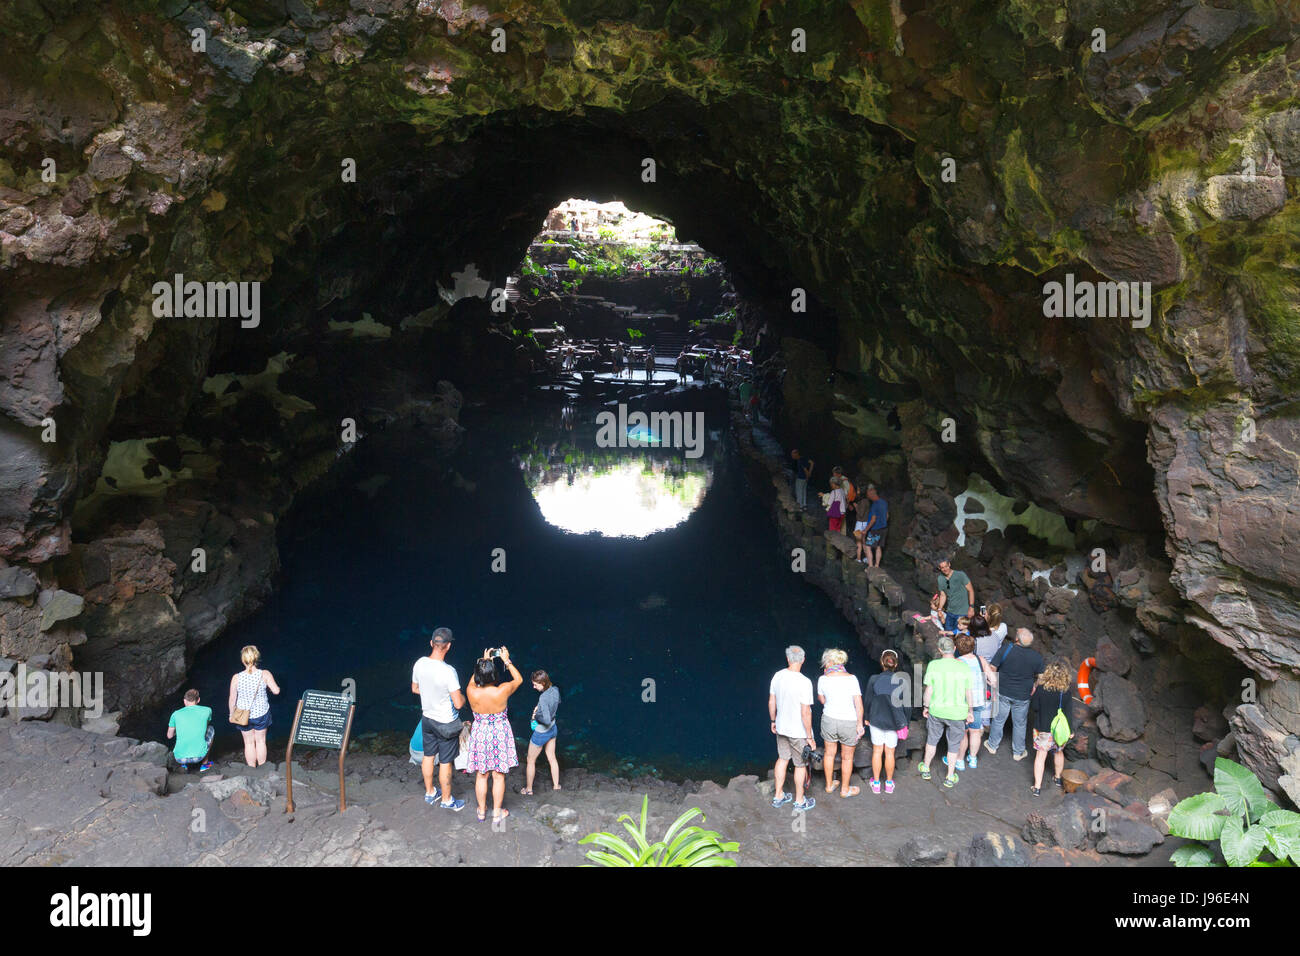 Lanzarote Jameos del Agua caves - tourists in the volcanic cave adapted by artist Cesar Manrique at Jameos del Agua, Lanzarote, Canary Islands Europe Stock Photo